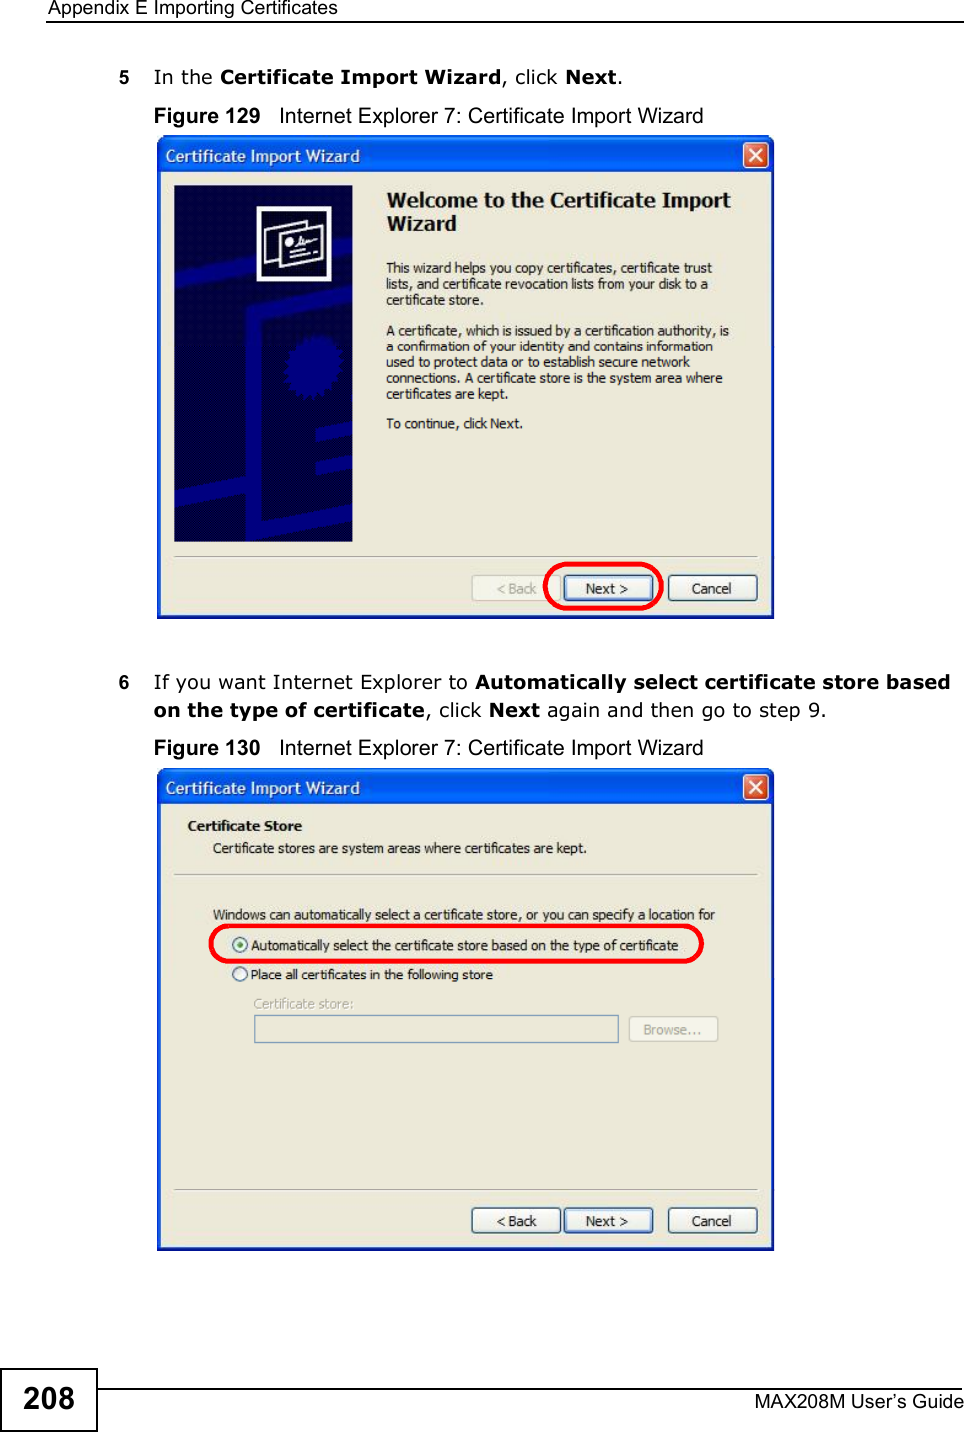 Appendix EImporting CertificatesMAX208M User s Guide2085In the Certificate Import Wizard, click Next.Figure 129   Internet Explorer 7: Certificate Import Wizard6If you want Internet Explorer to Automatically select certificate store based on the type of certificate, click Next again and then go to step 9.Figure 130   Internet Explorer 7: Certificate Import Wizard